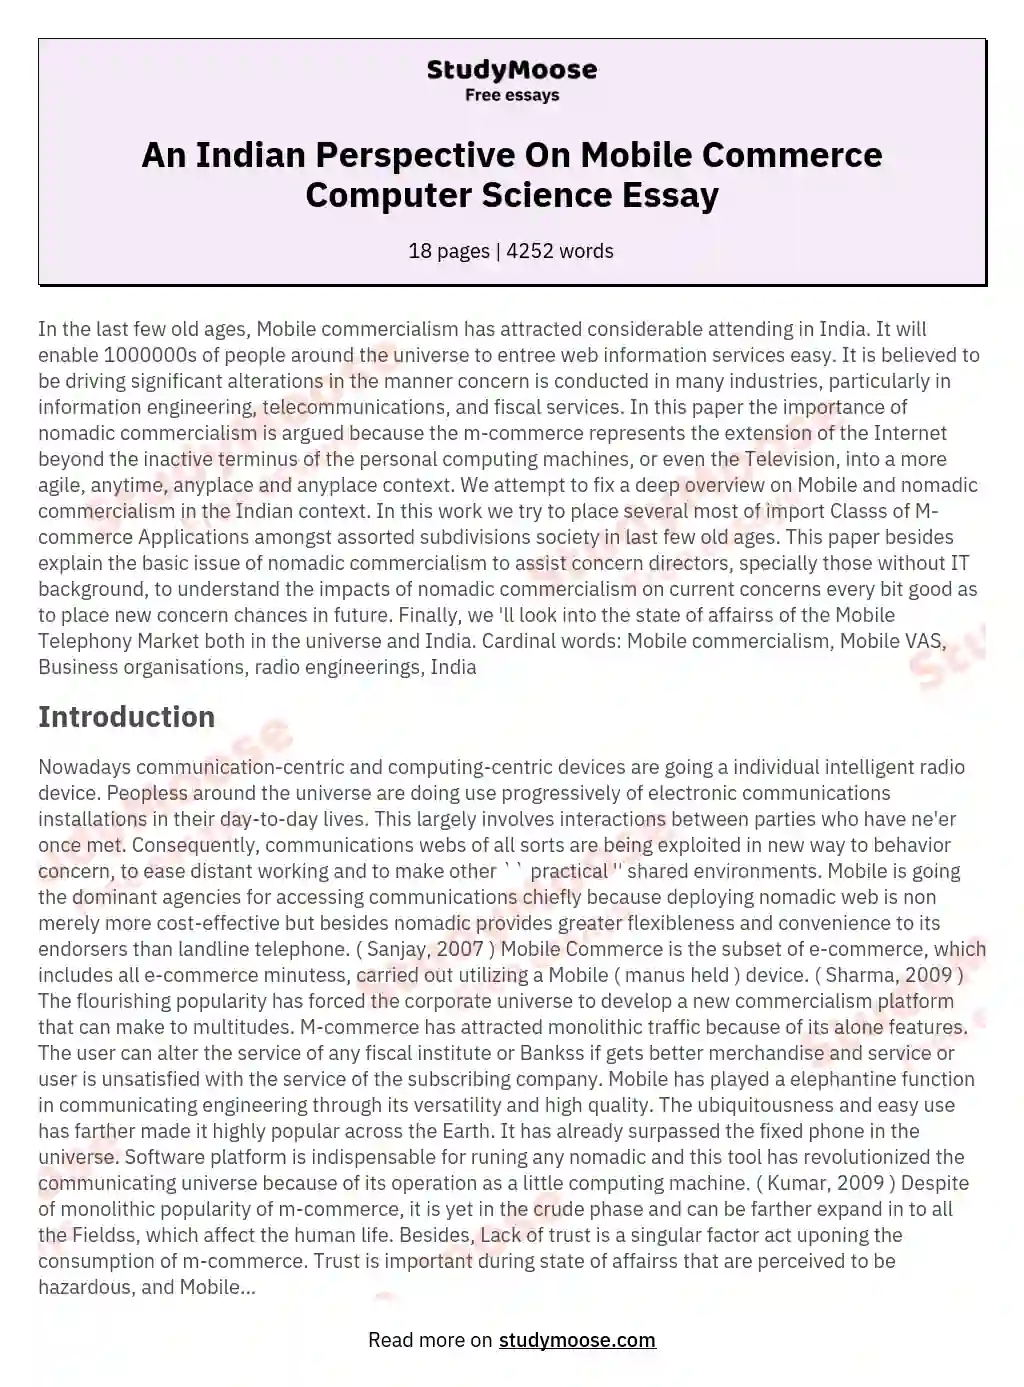 An Indian Perspective On Mobile Commerce Computer Science Essay essay